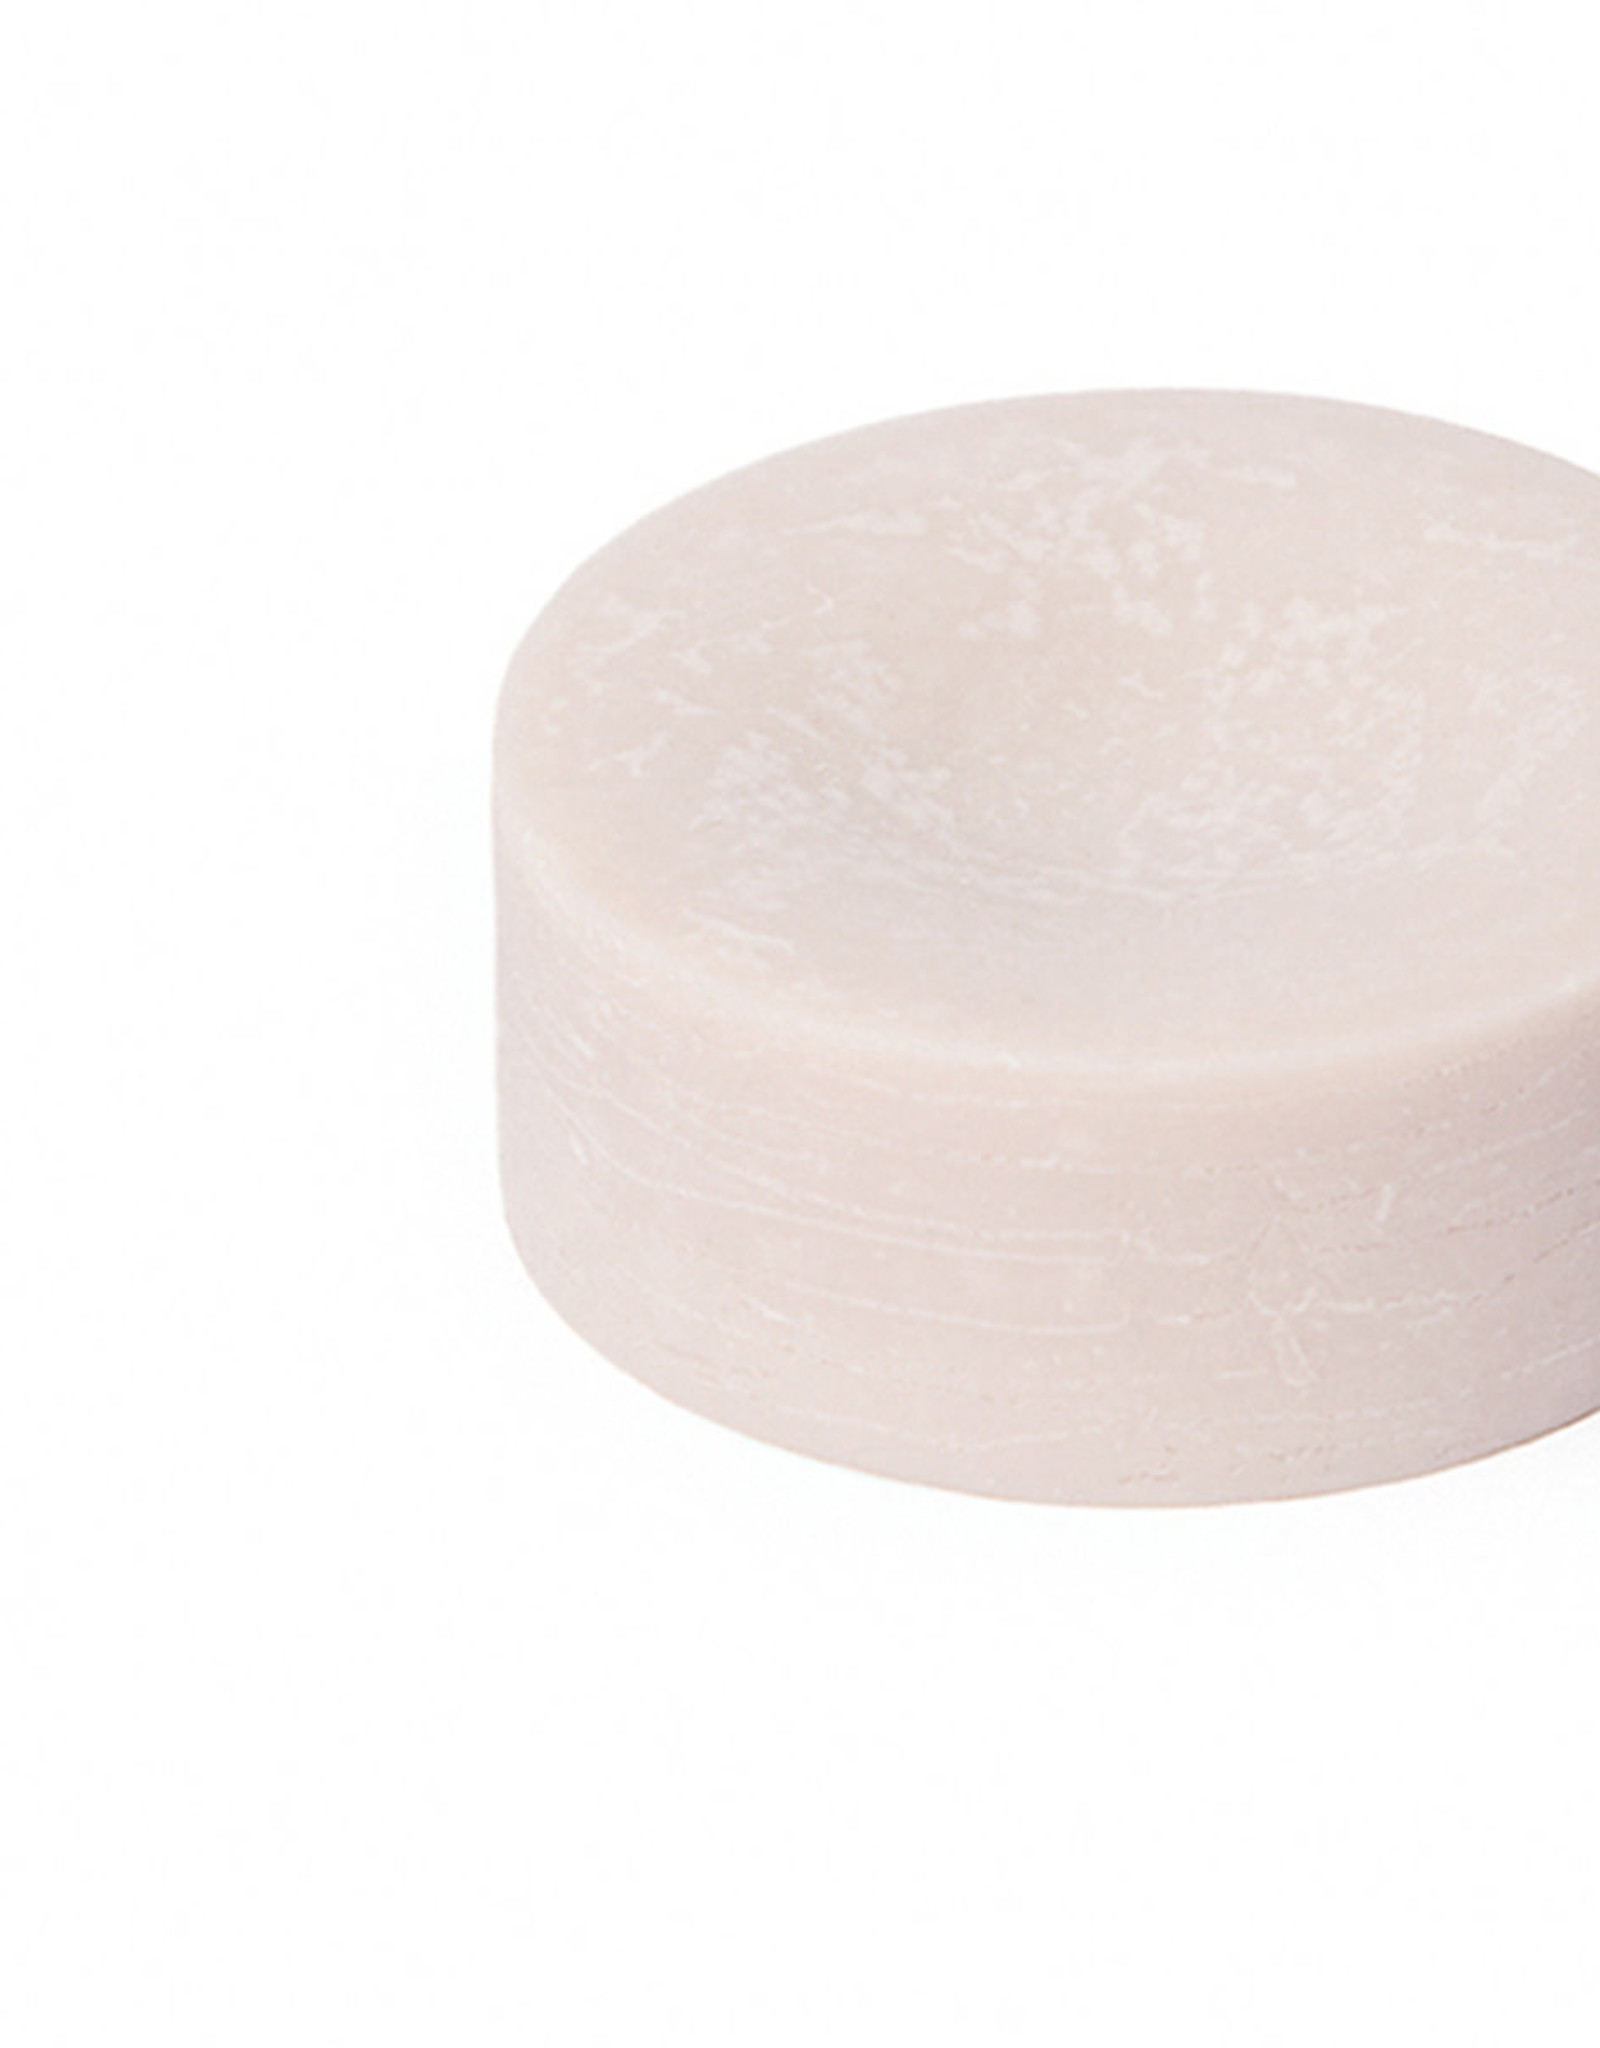 Unwrapped Life The Fixer Conditioner Bar